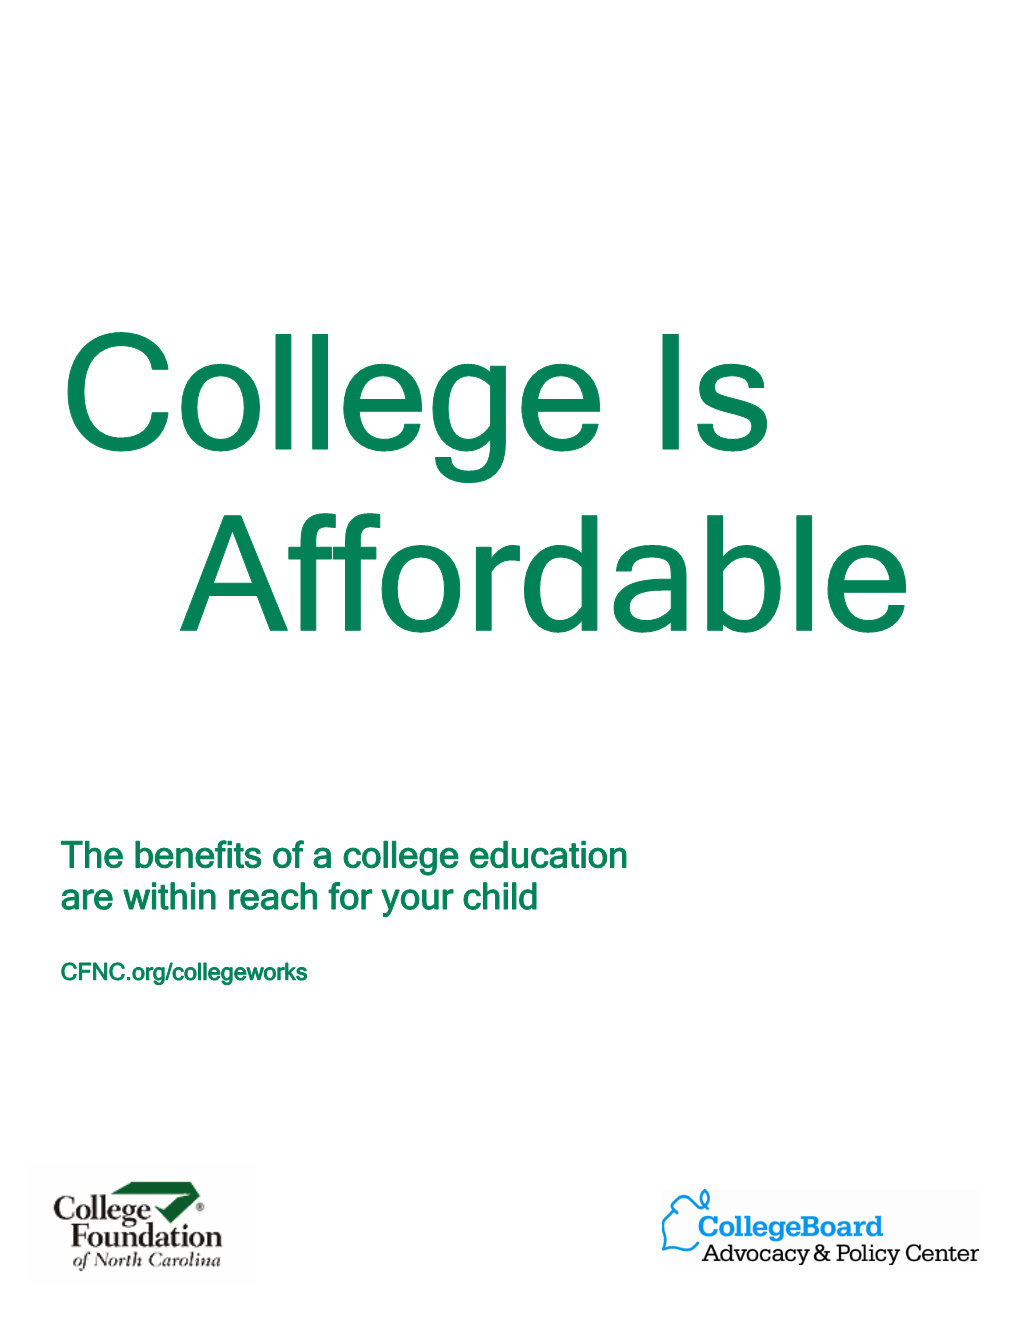 The Benefits of a College Education Are Within Reach for Your Child